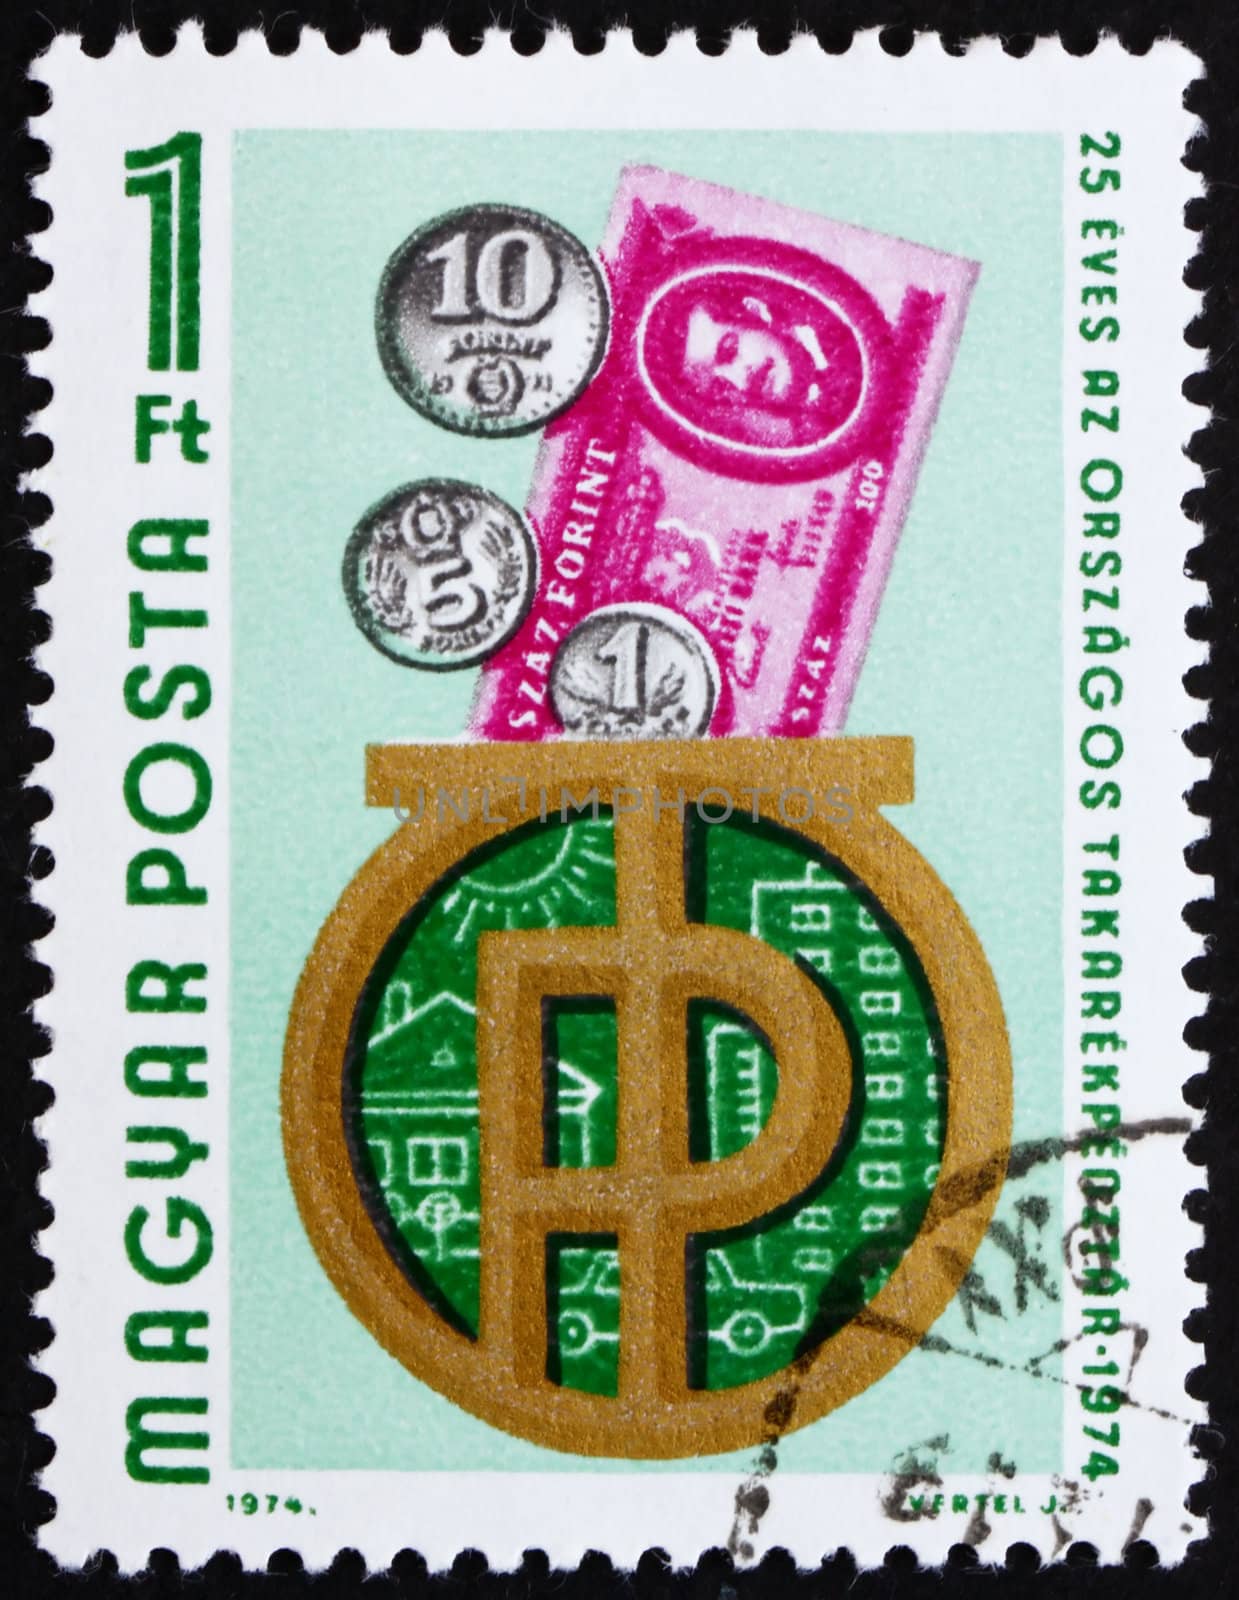 HUNGARY - CIRCA 1974: a stamp printed in the Hungary shows Bank Emblem, Coins and Banknote, 25th Anniversary of the State Savings Bank, circa 1974